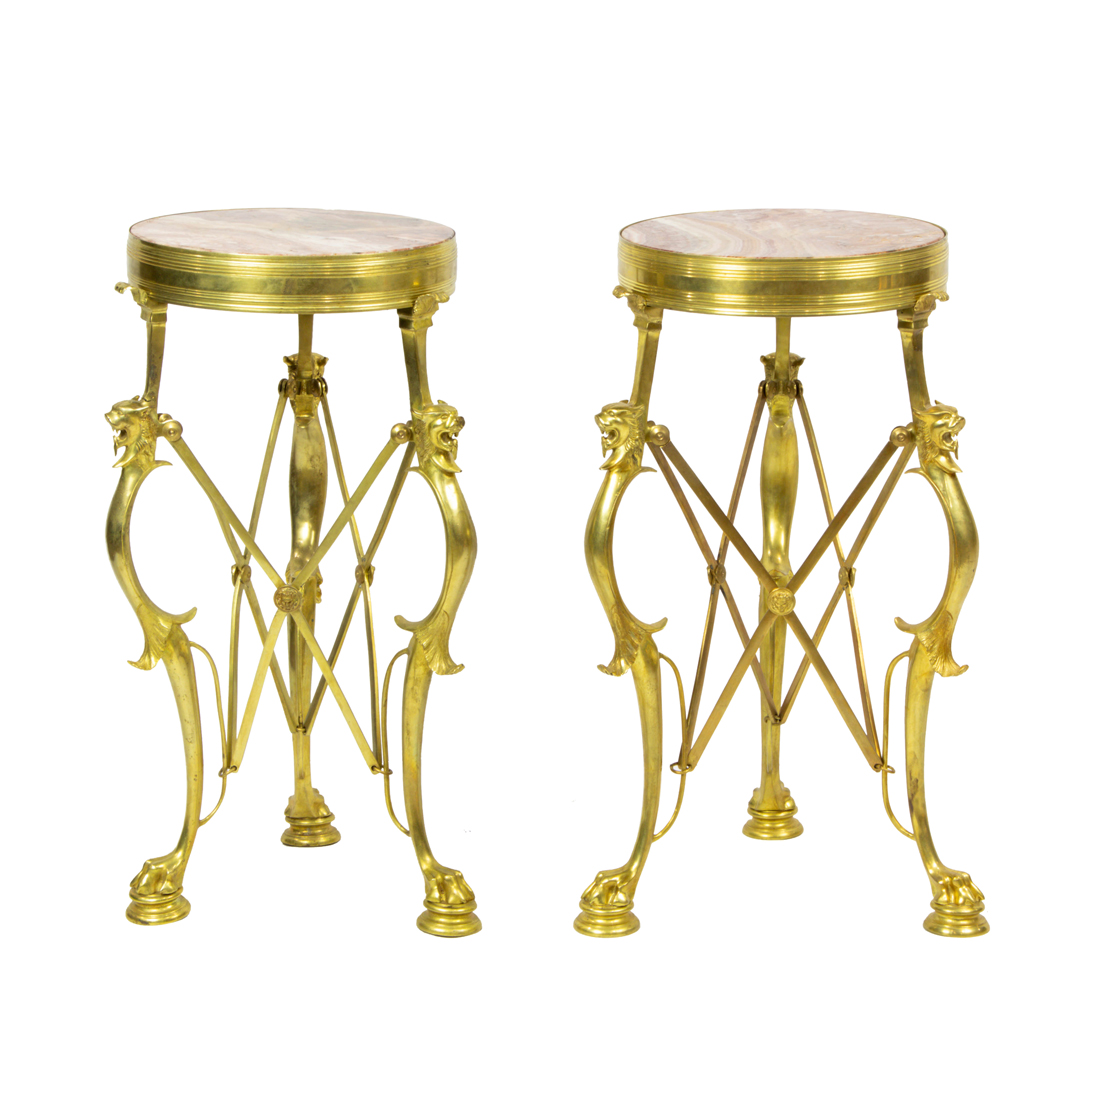 A PAIR OF GILT BRONZE AND MARBLE